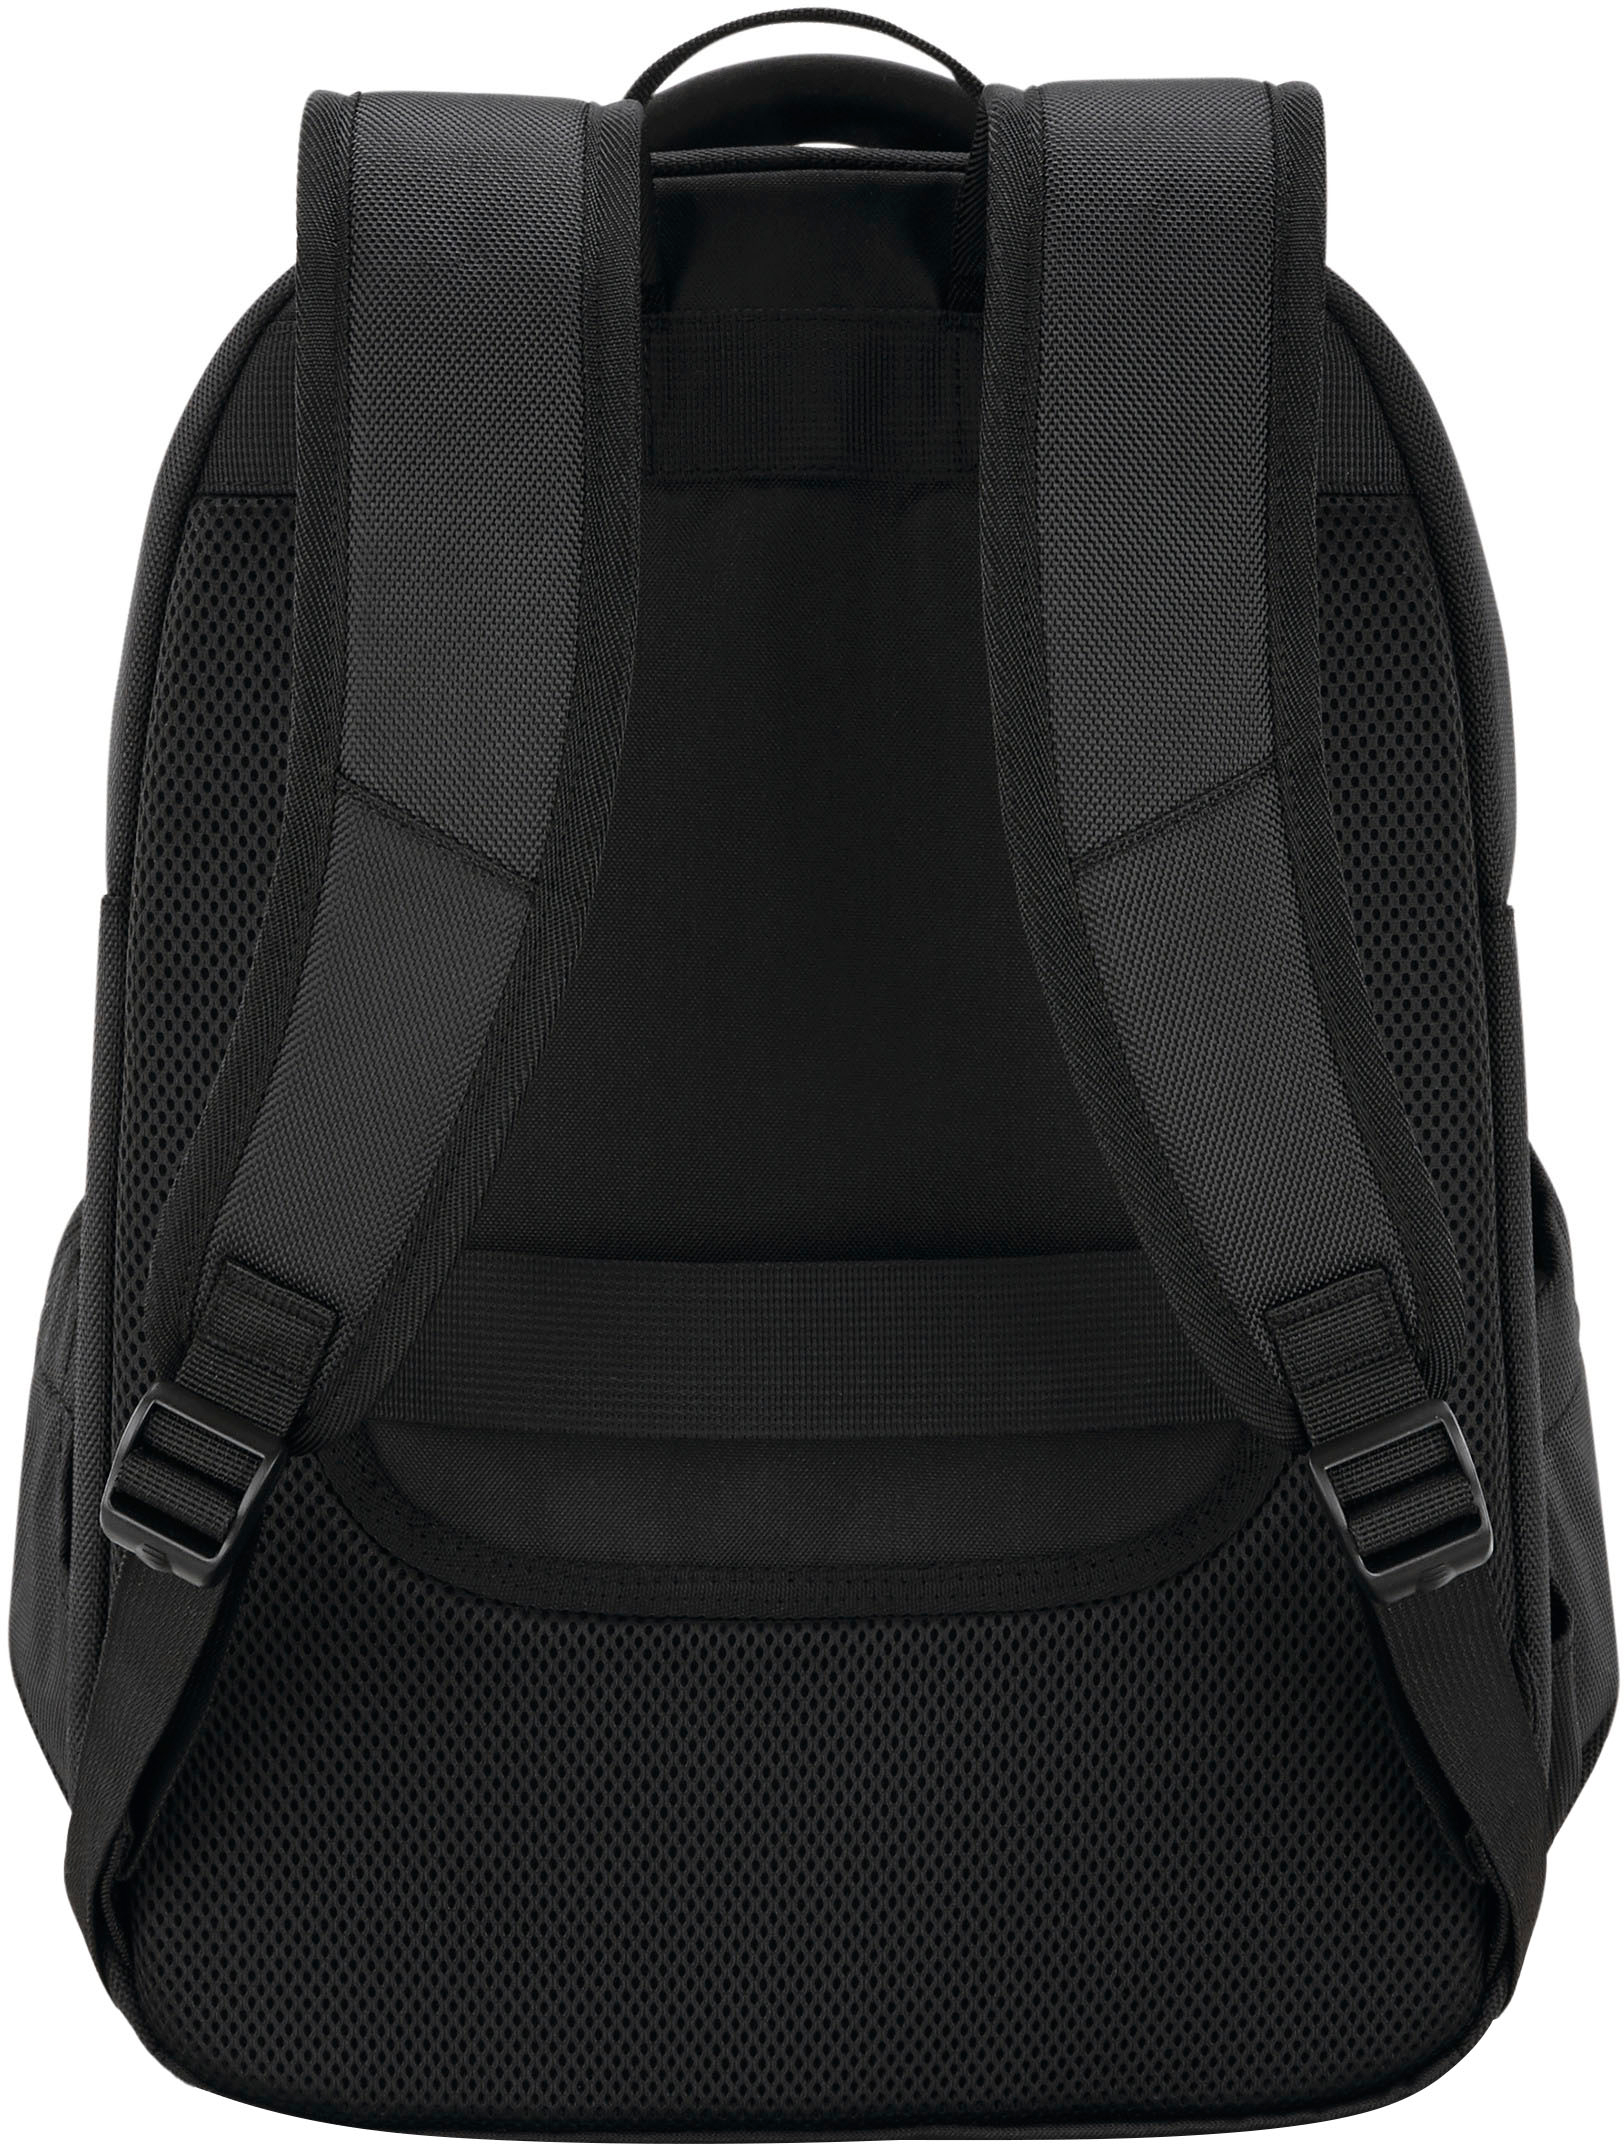 Back View: Thule - Construct Backpack for 15.6" laptop and 10.1" table - Carbon Blue